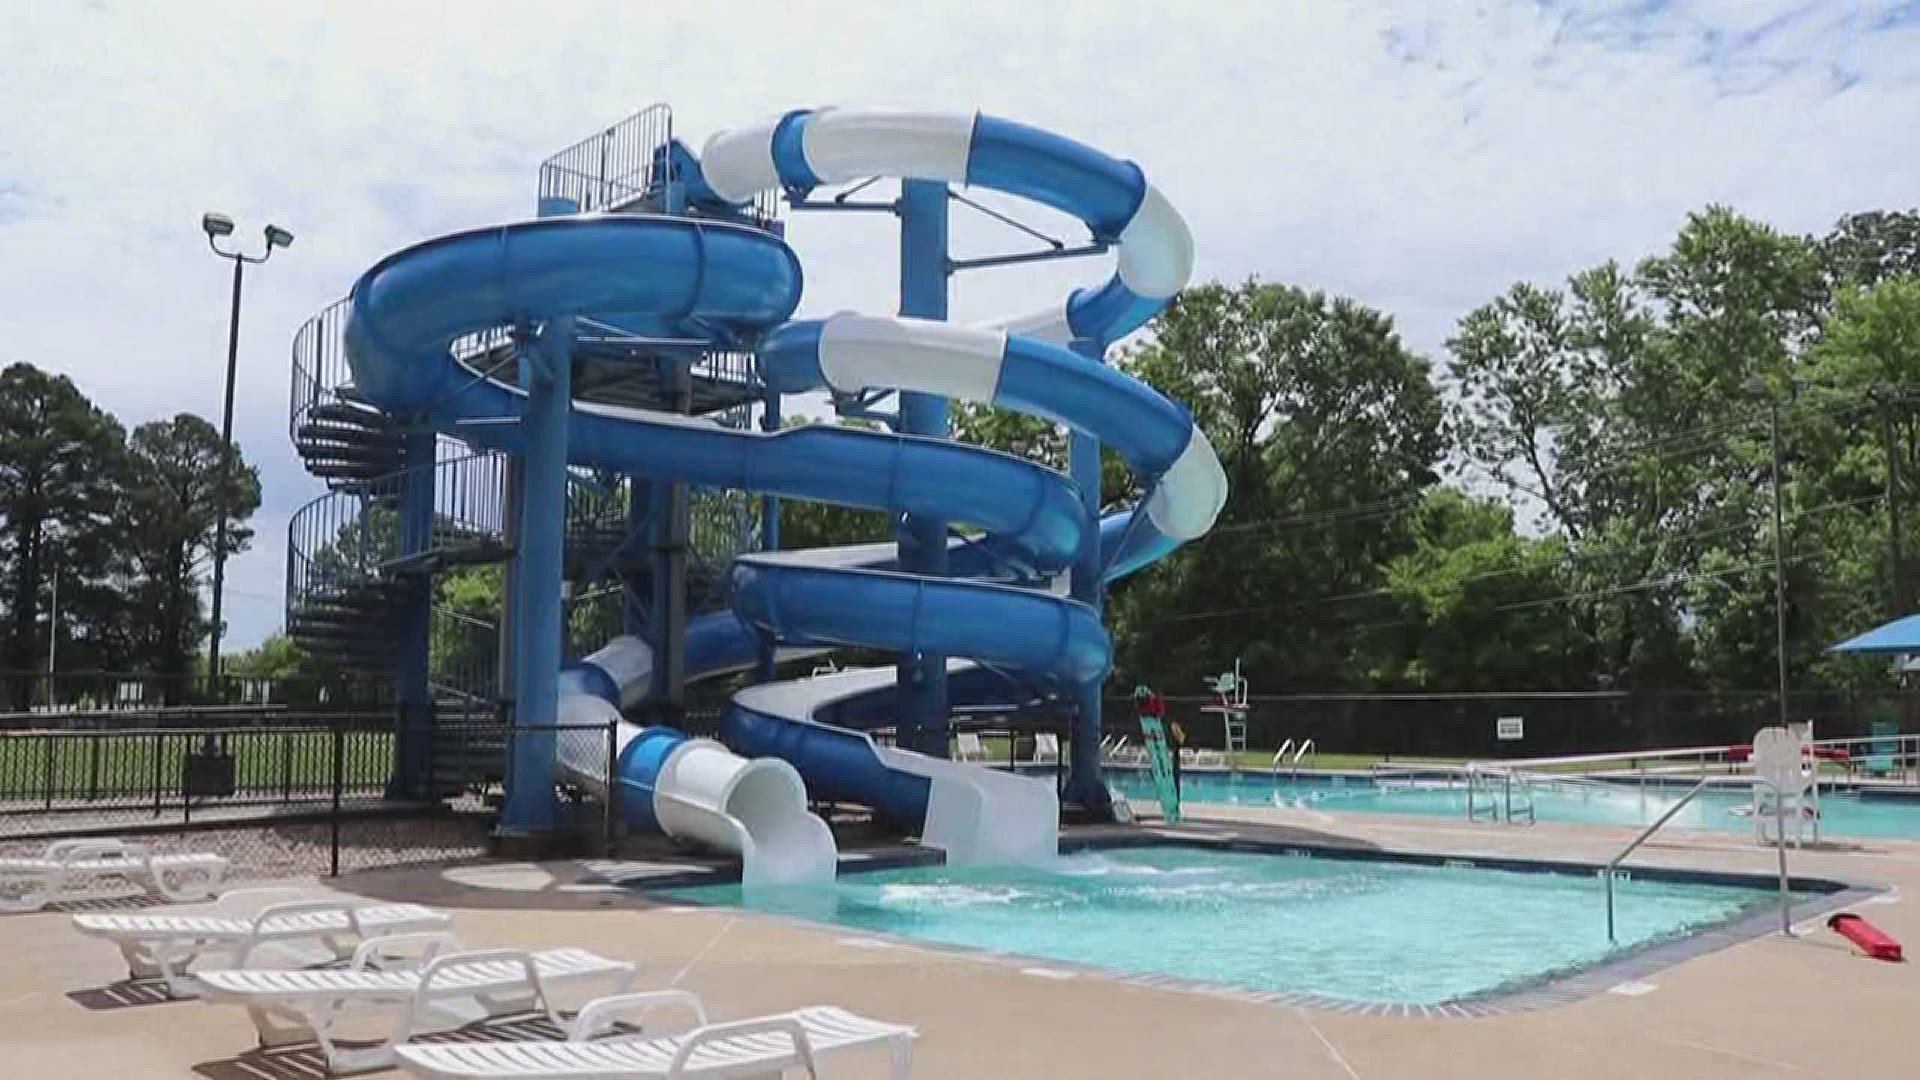 Under state health guidelines, public pools, splash pads, and swim beaches are now allowed to open in Arkansas, just in time for Memorial Day weekend.